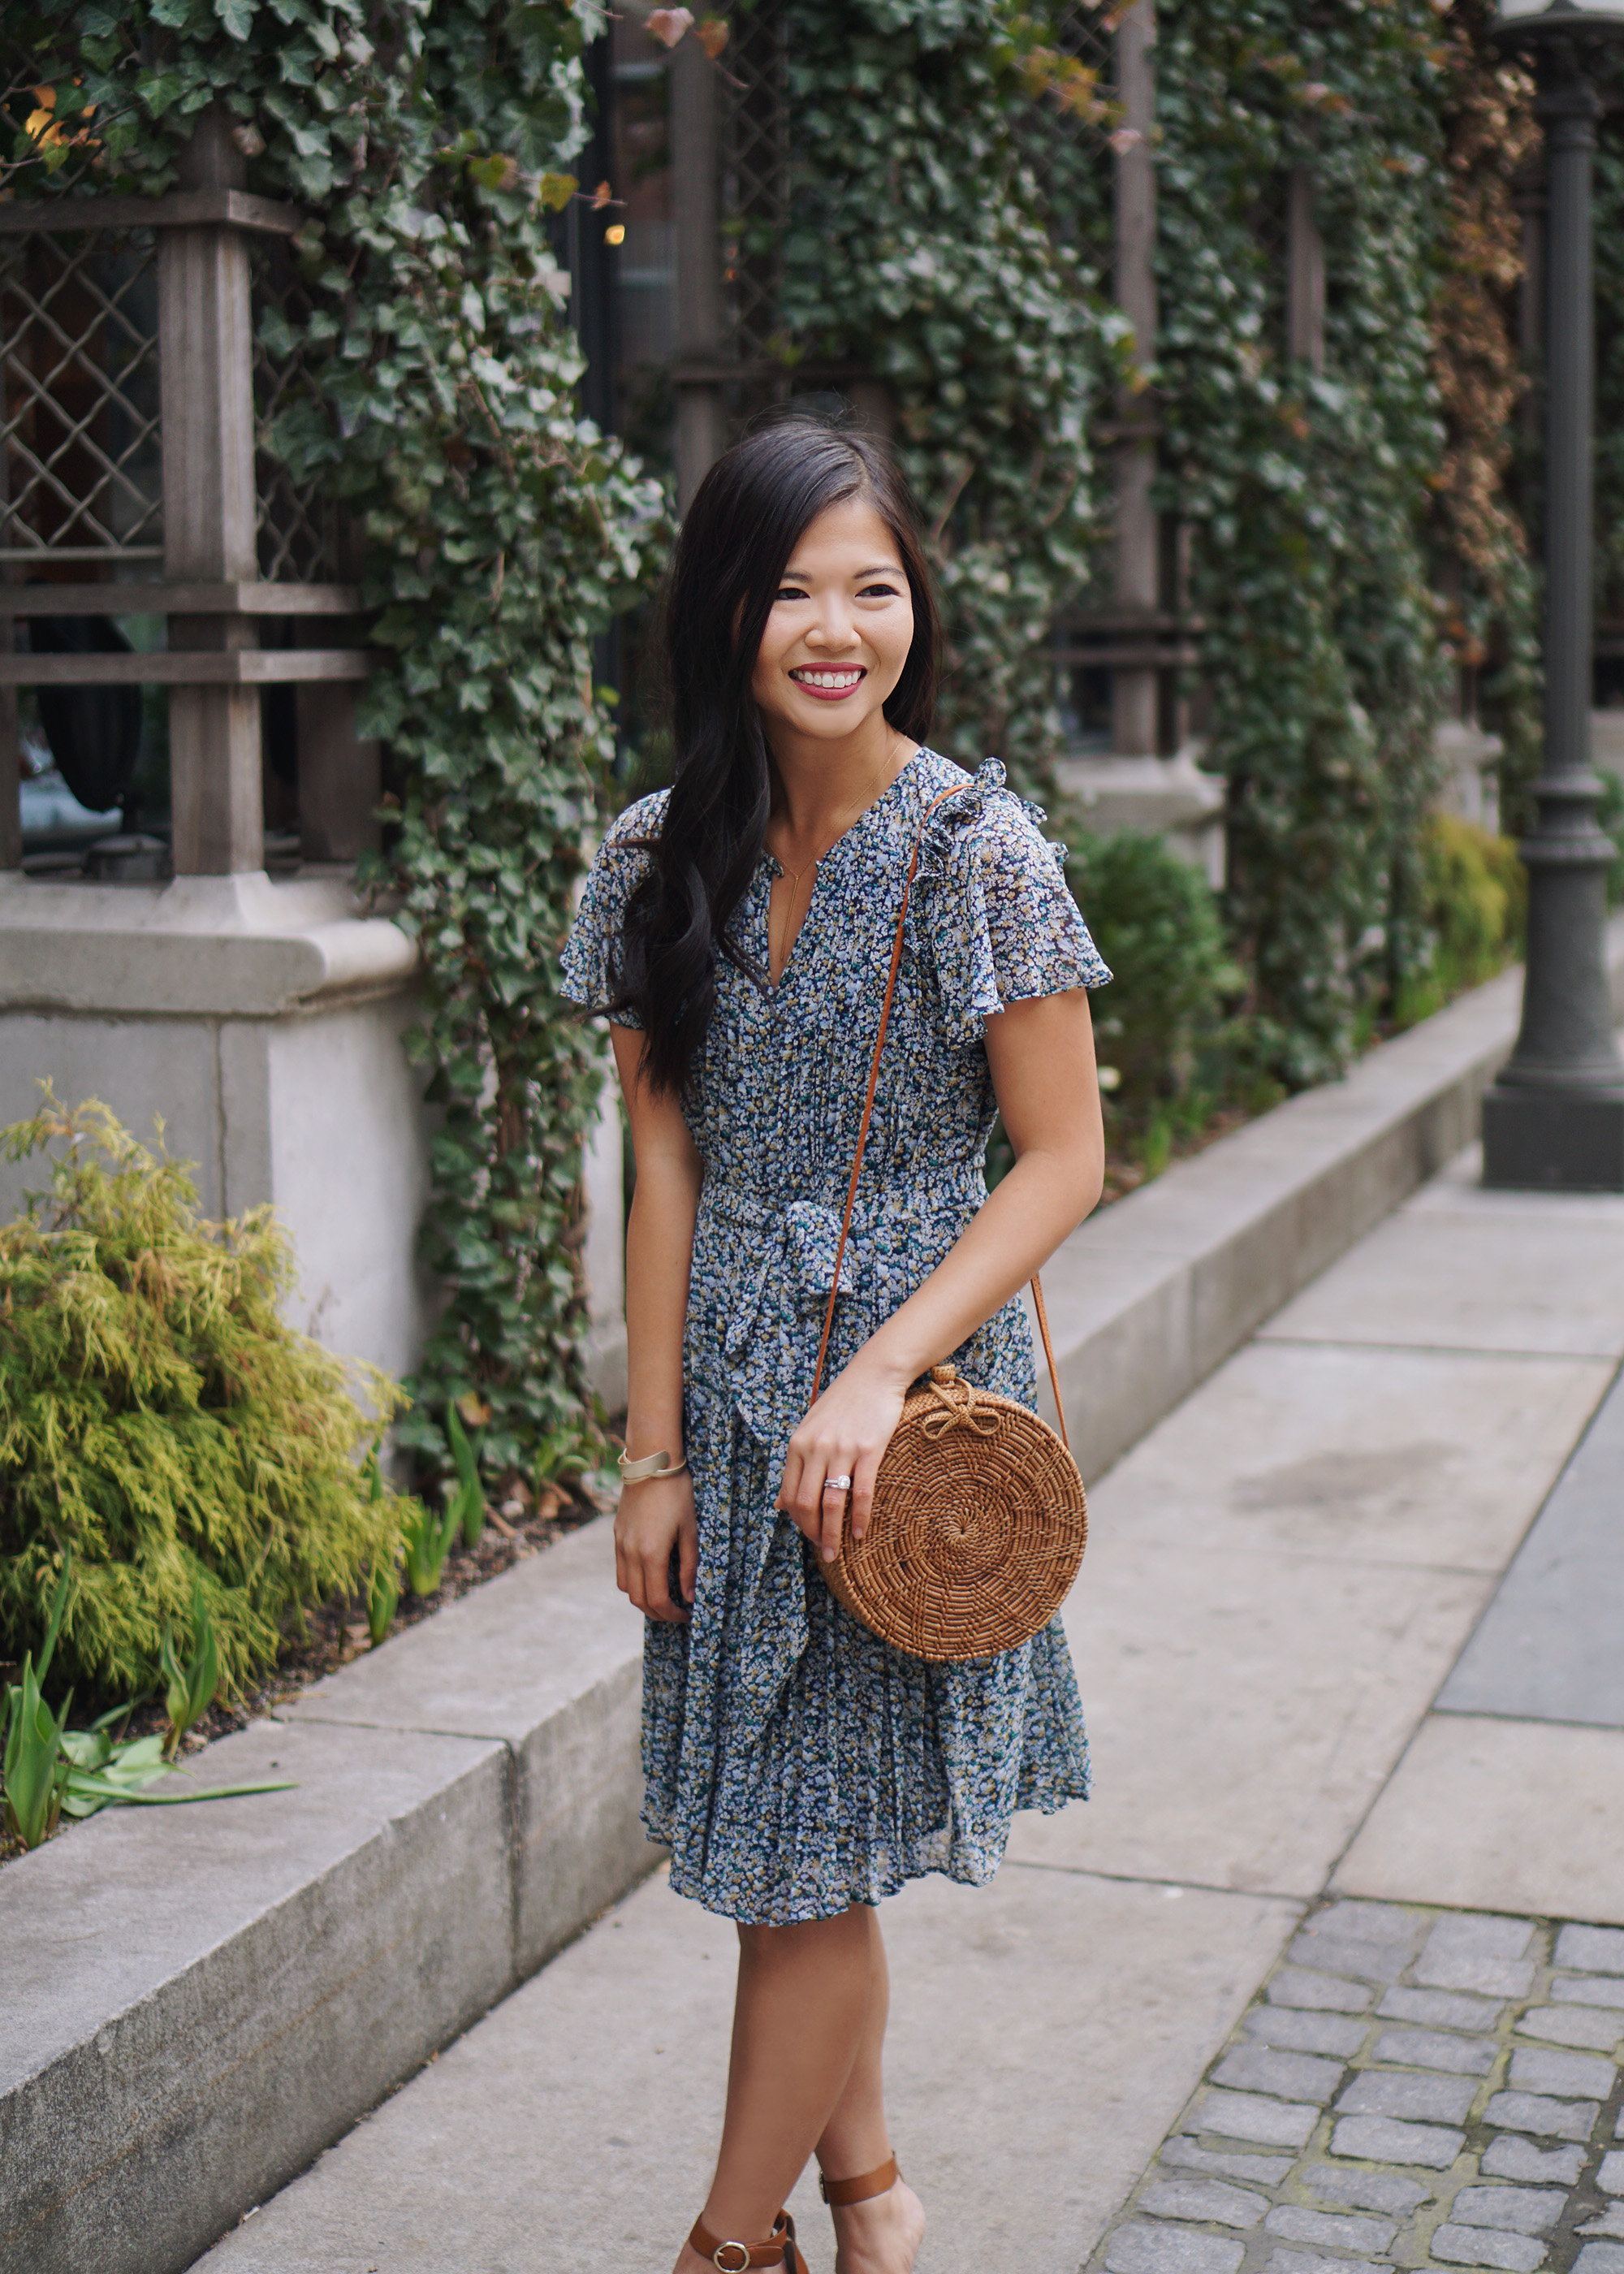 Spring Outfit Idea / Floral Dress & Straw Circle Bag